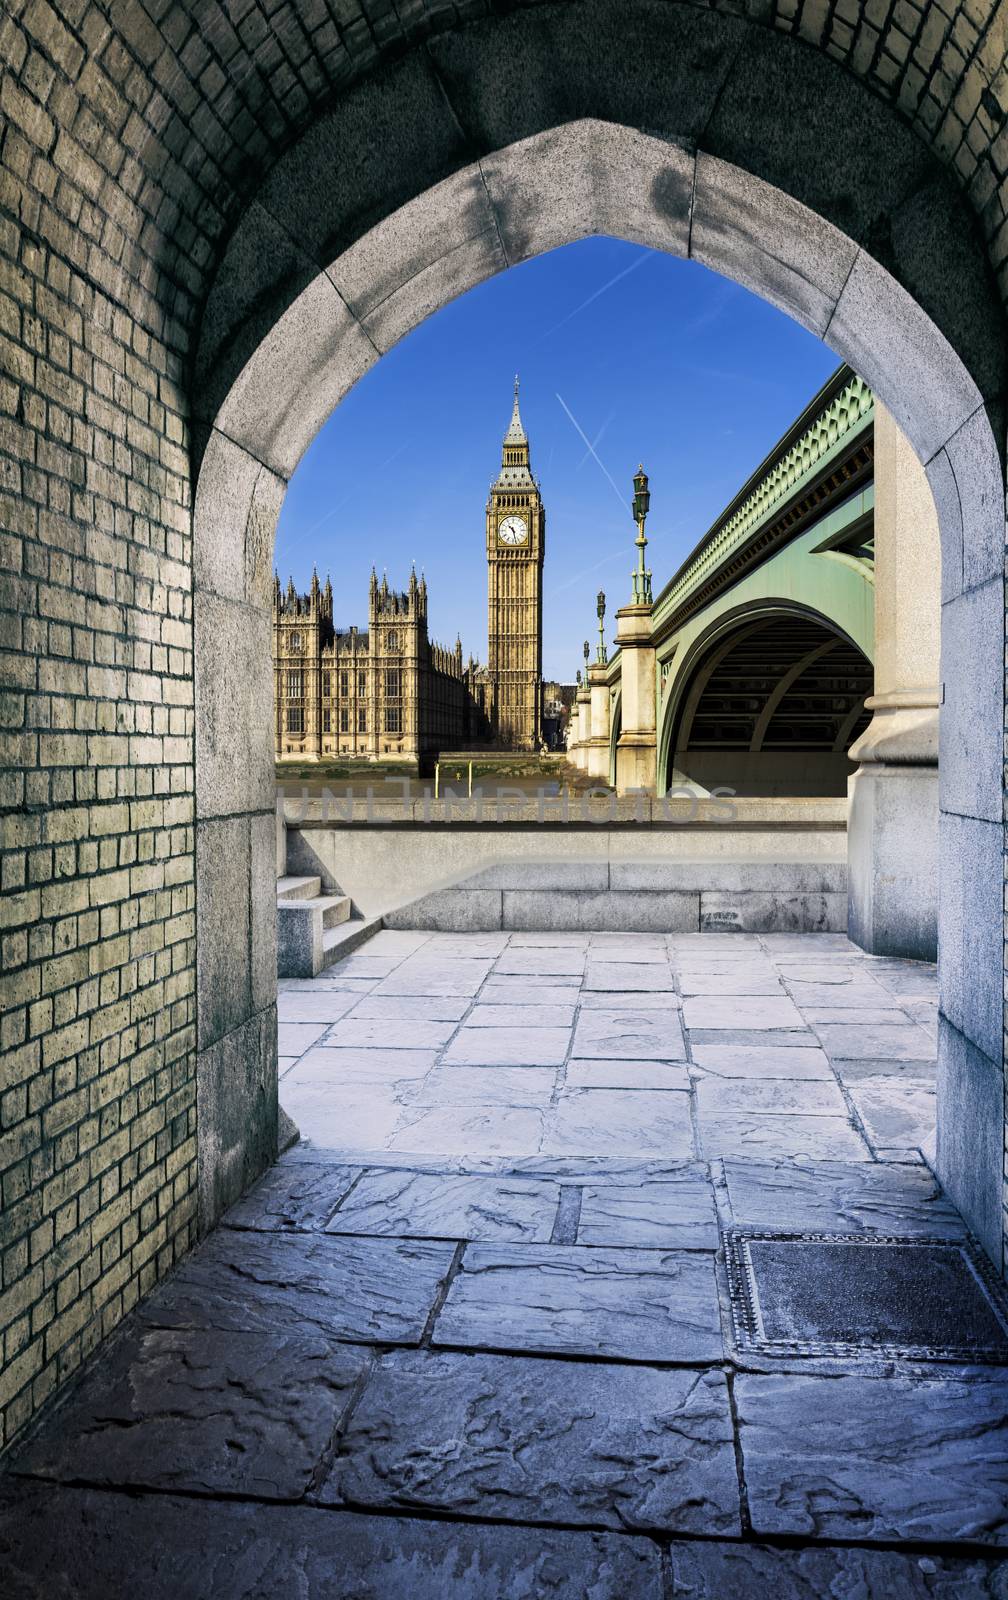 View of Big Ben through the pedestrian tunnel at sunset, London.